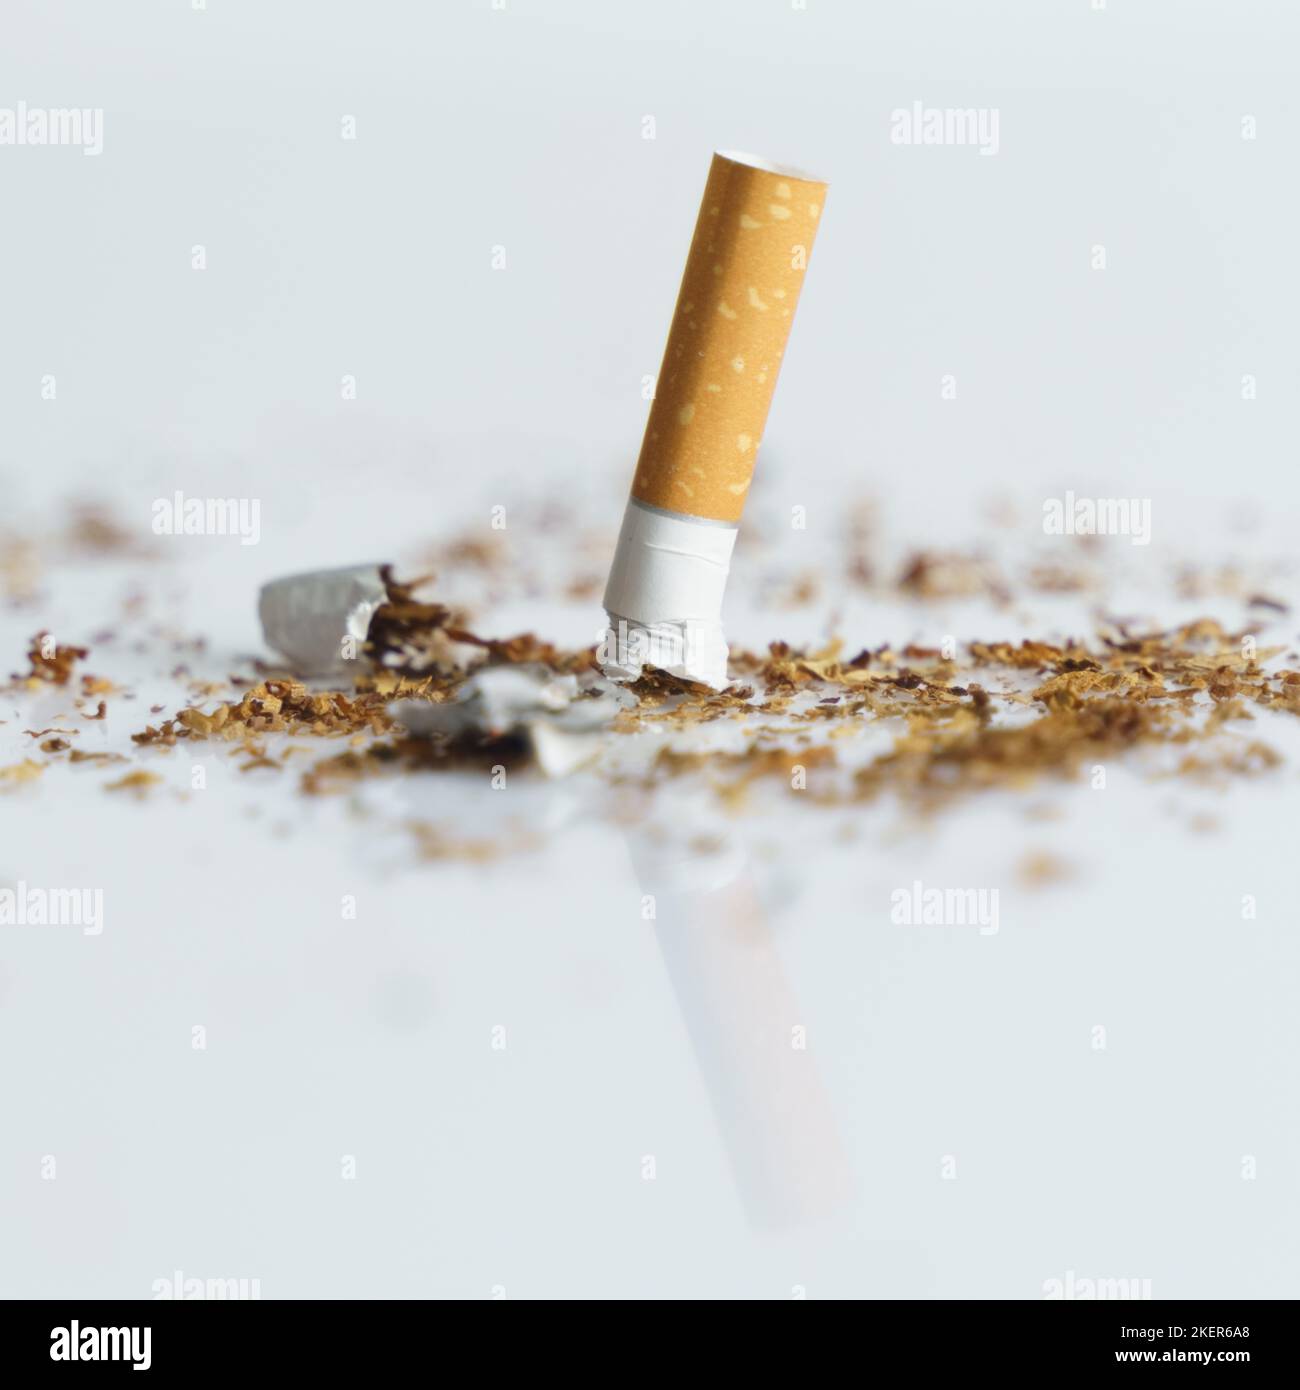 The concept of medicine is the fight against smoking. The cigarette butt is  quenched among tobacco on a white reflective surface Stock Photo - Alamy